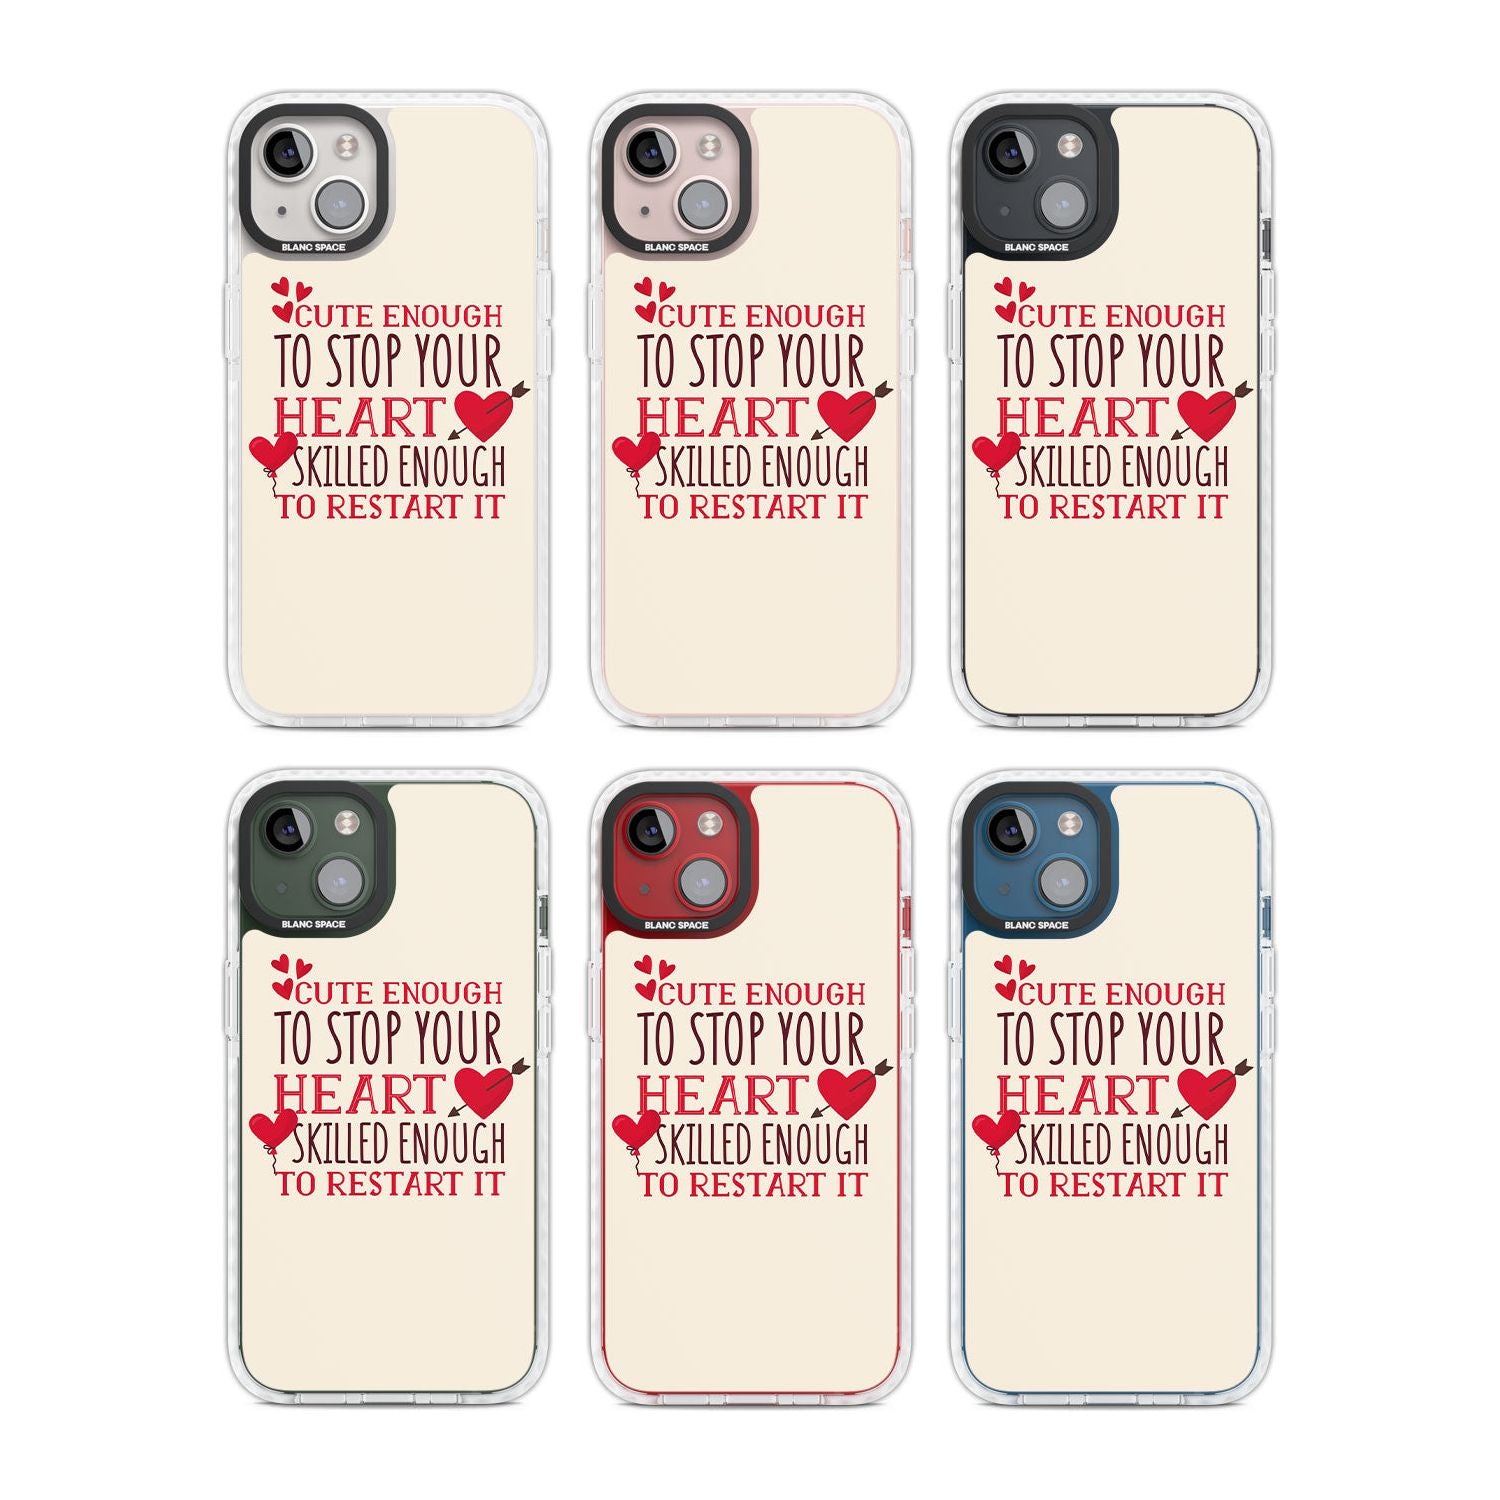 Medical Design Cute Enough to Stop Your Heart Phone Case iPhone 15 Pro Max / Black Impact Case,iPhone 15 Plus / Black Impact Case,iPhone 15 Pro / Black Impact Case,iPhone 15 / Black Impact Case,iPhone 15 Pro Max / Impact Case,iPhone 15 Plus / Impact Case,iPhone 15 Pro / Impact Case,iPhone 15 / Impact Case,iPhone 15 Pro Max / Magsafe Black Impact Case,iPhone 15 Plus / Magsafe Black Impact Case,iPhone 15 Pro / Magsafe Black Impact Case,iPhone 15 / Magsafe Black Impact Case,iPhone 14 Pro Max / Black Impact Cas